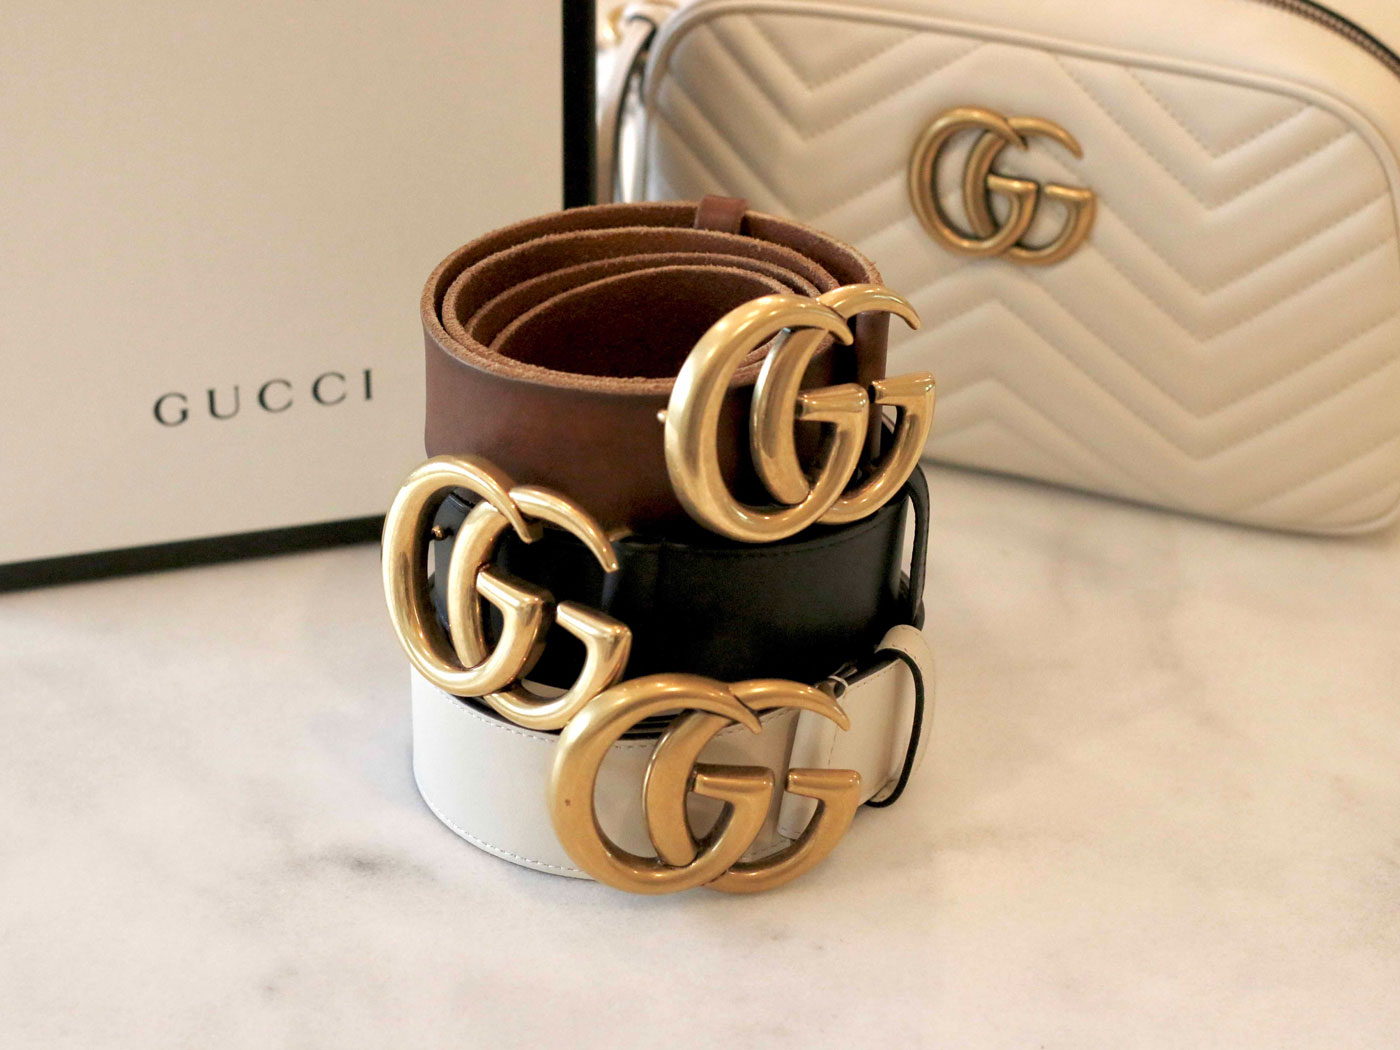 zweer strijd Verzorger Gucci Marmont Belt - Sizing And How To Add Holes - Stefana Silber